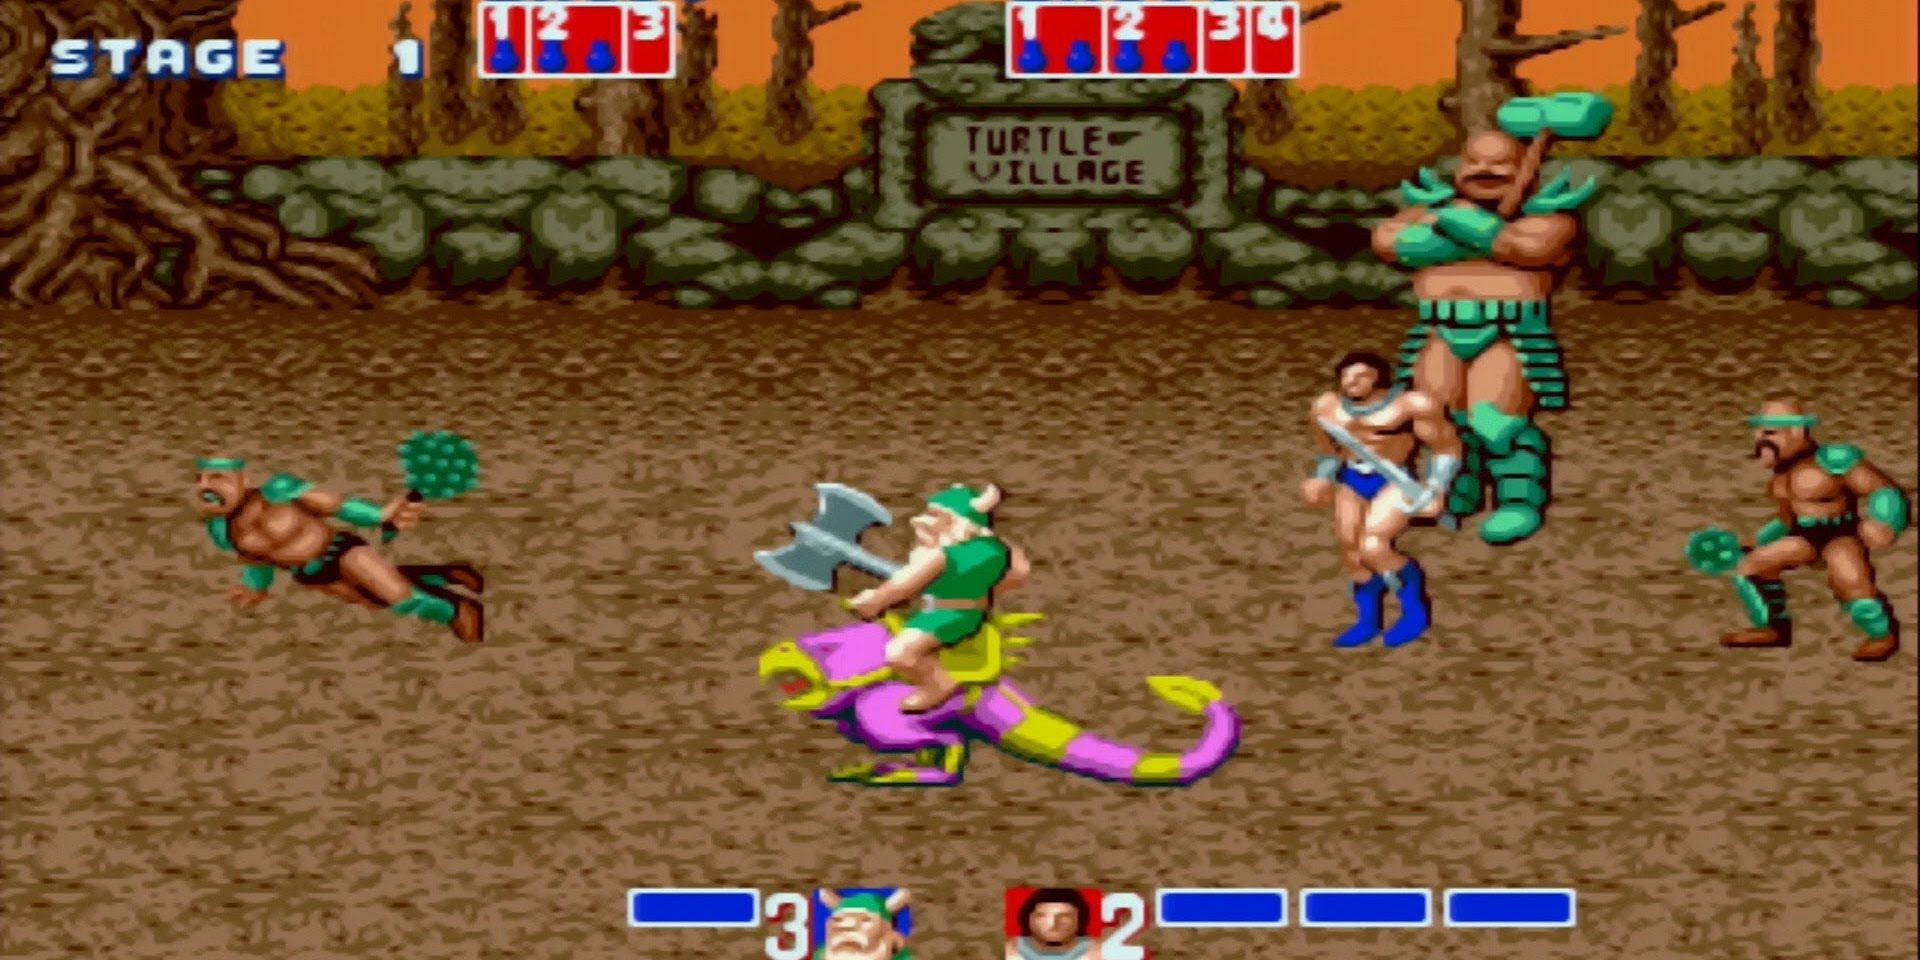 Player character heroes do battle with various bad guys in the classic Golden Axe arcade game.